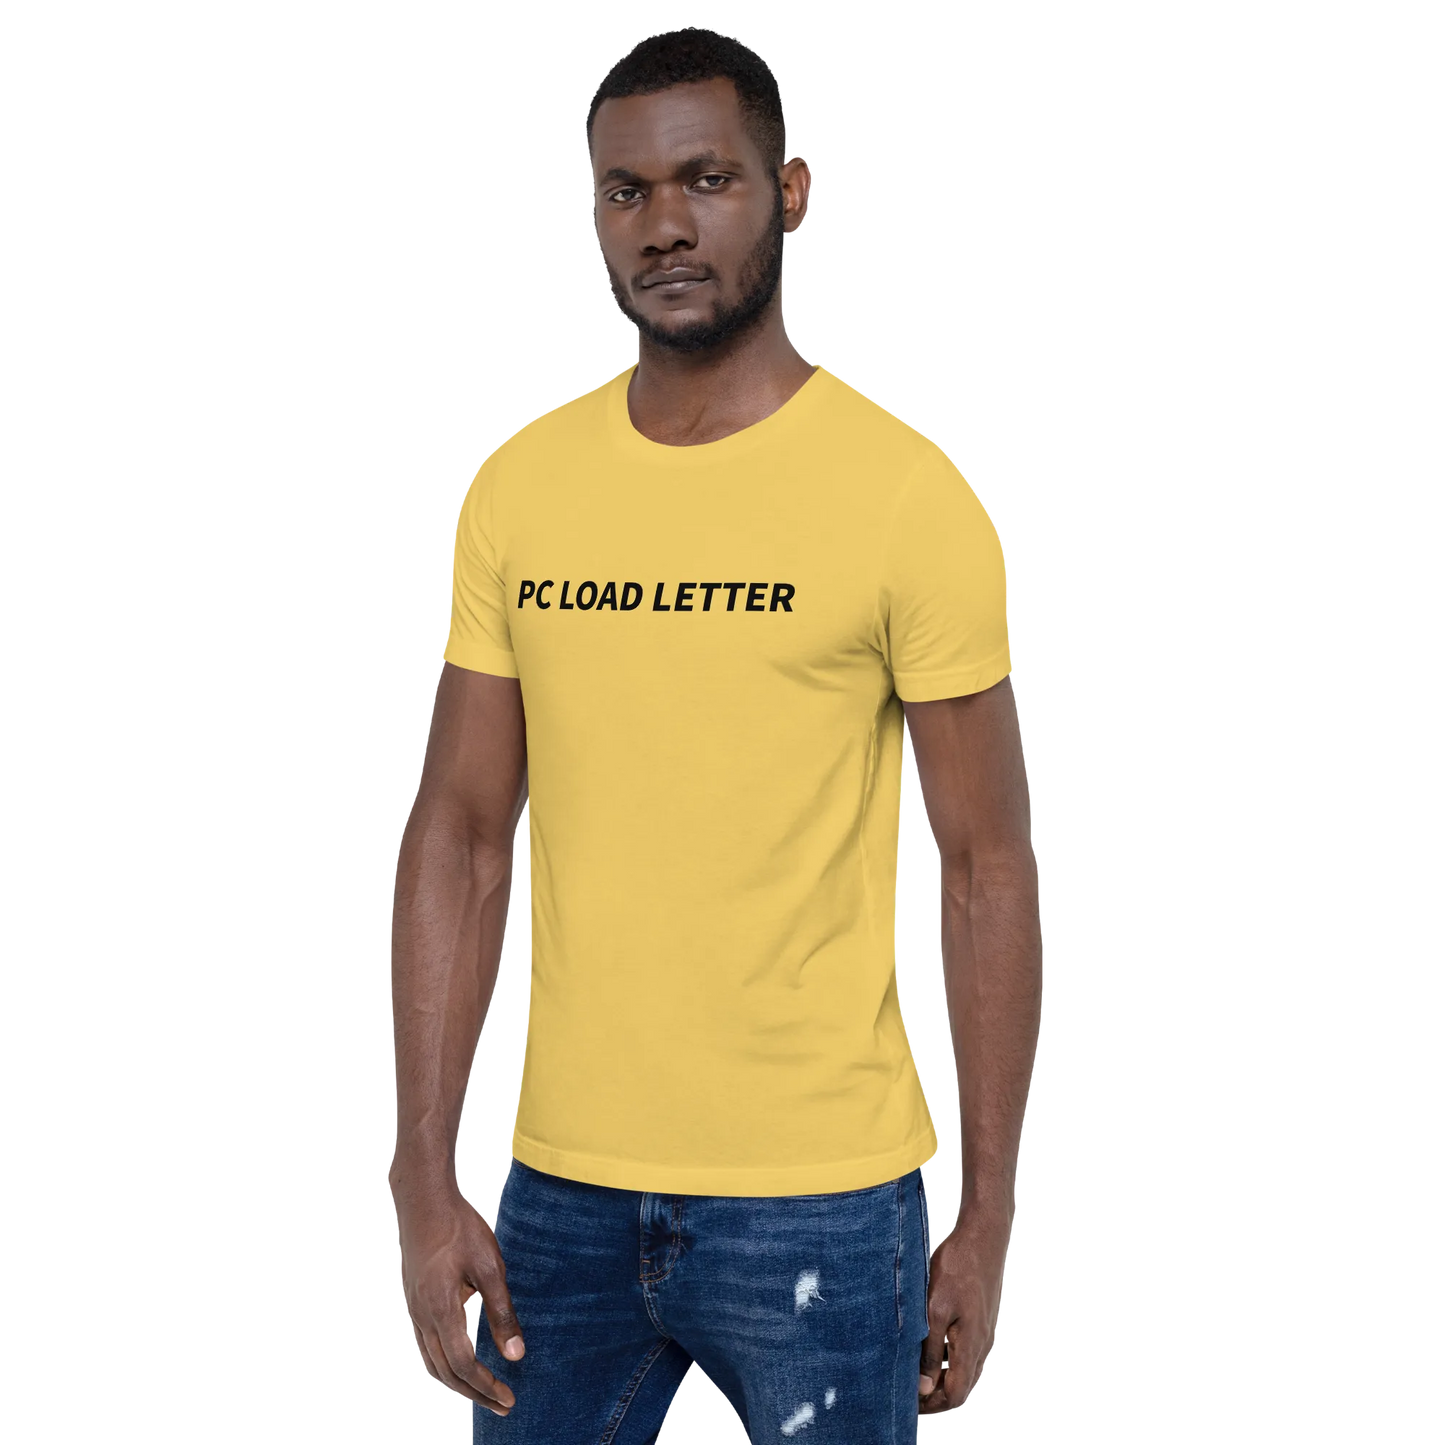 PC Load Letter Tee in Yellow on man left